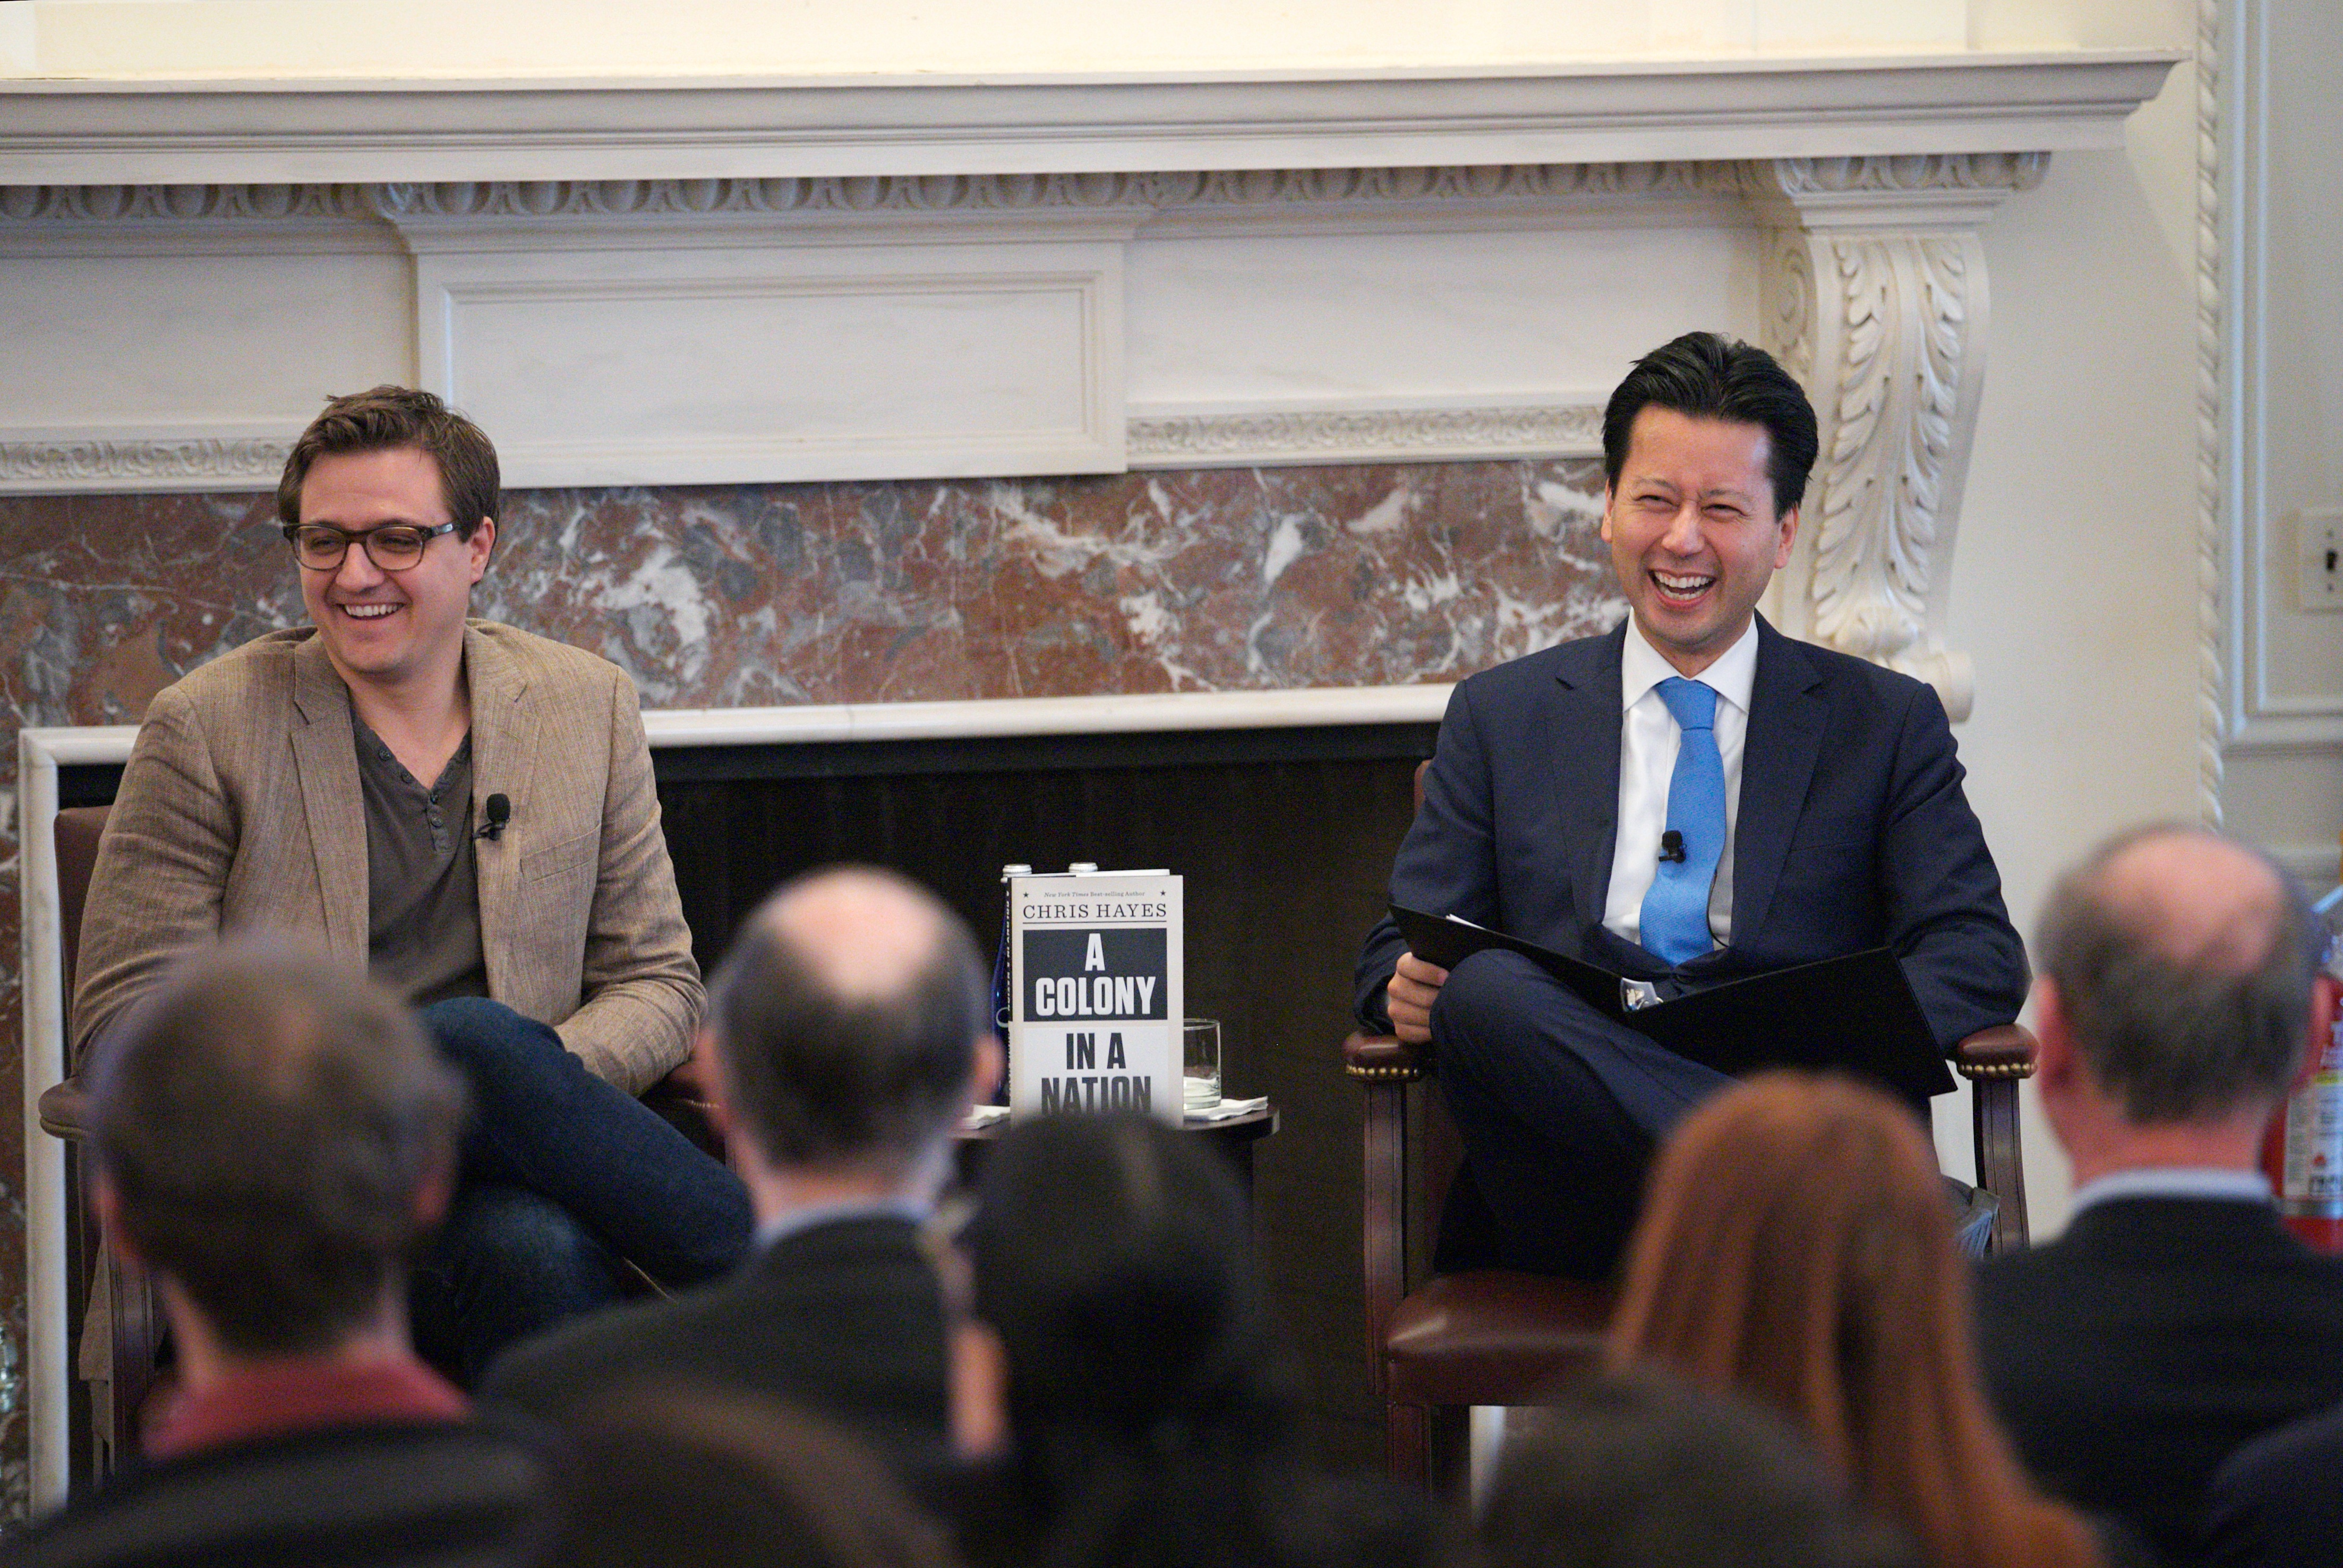 Chris Hayes and Professor Kenji Yoshino discuss Hayes' new book, A Colony in a Nation